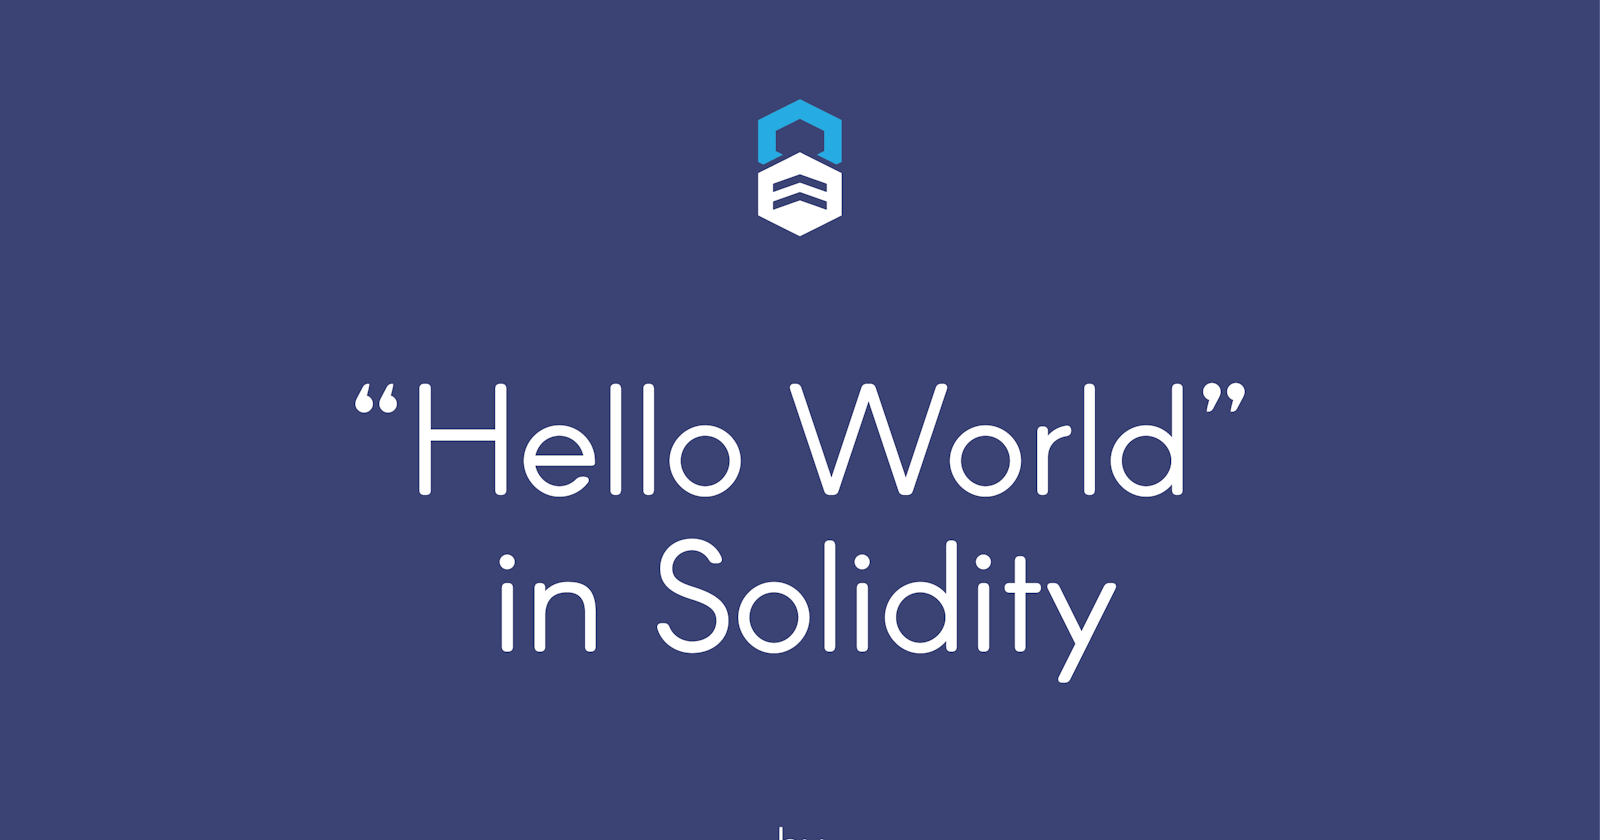 "Hello World" in Solidity